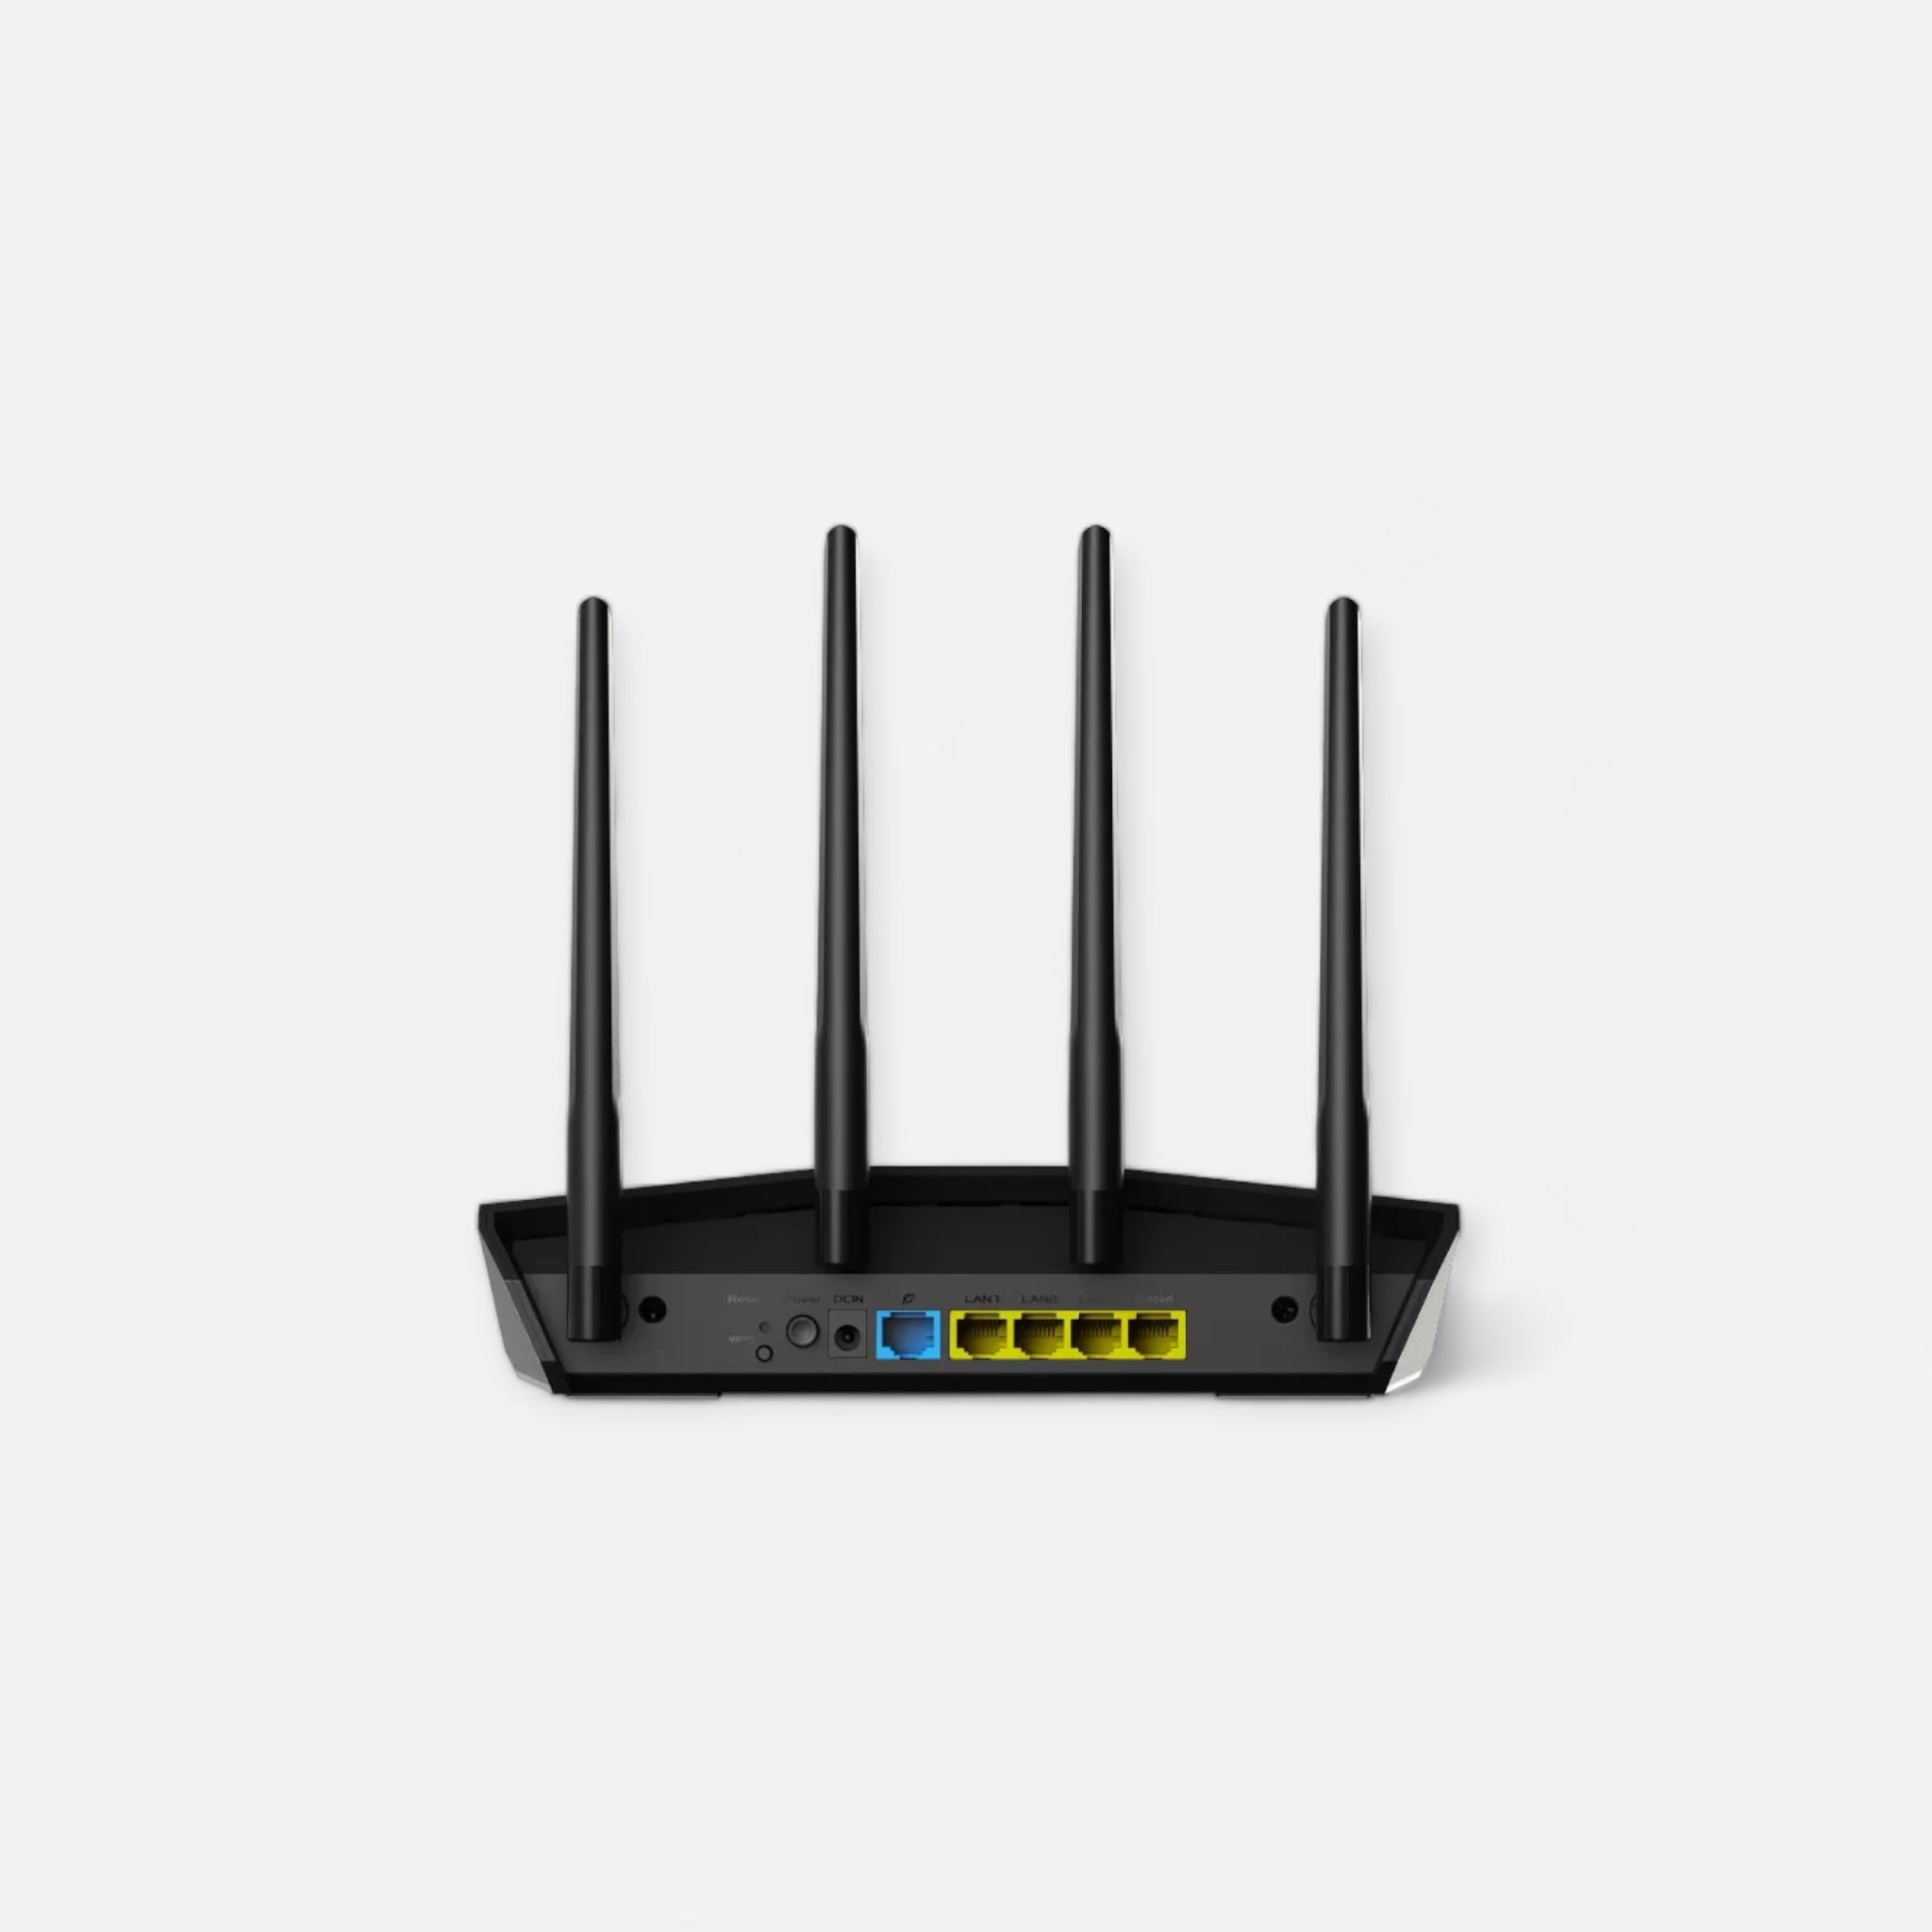 ASUS AX57 router ports 